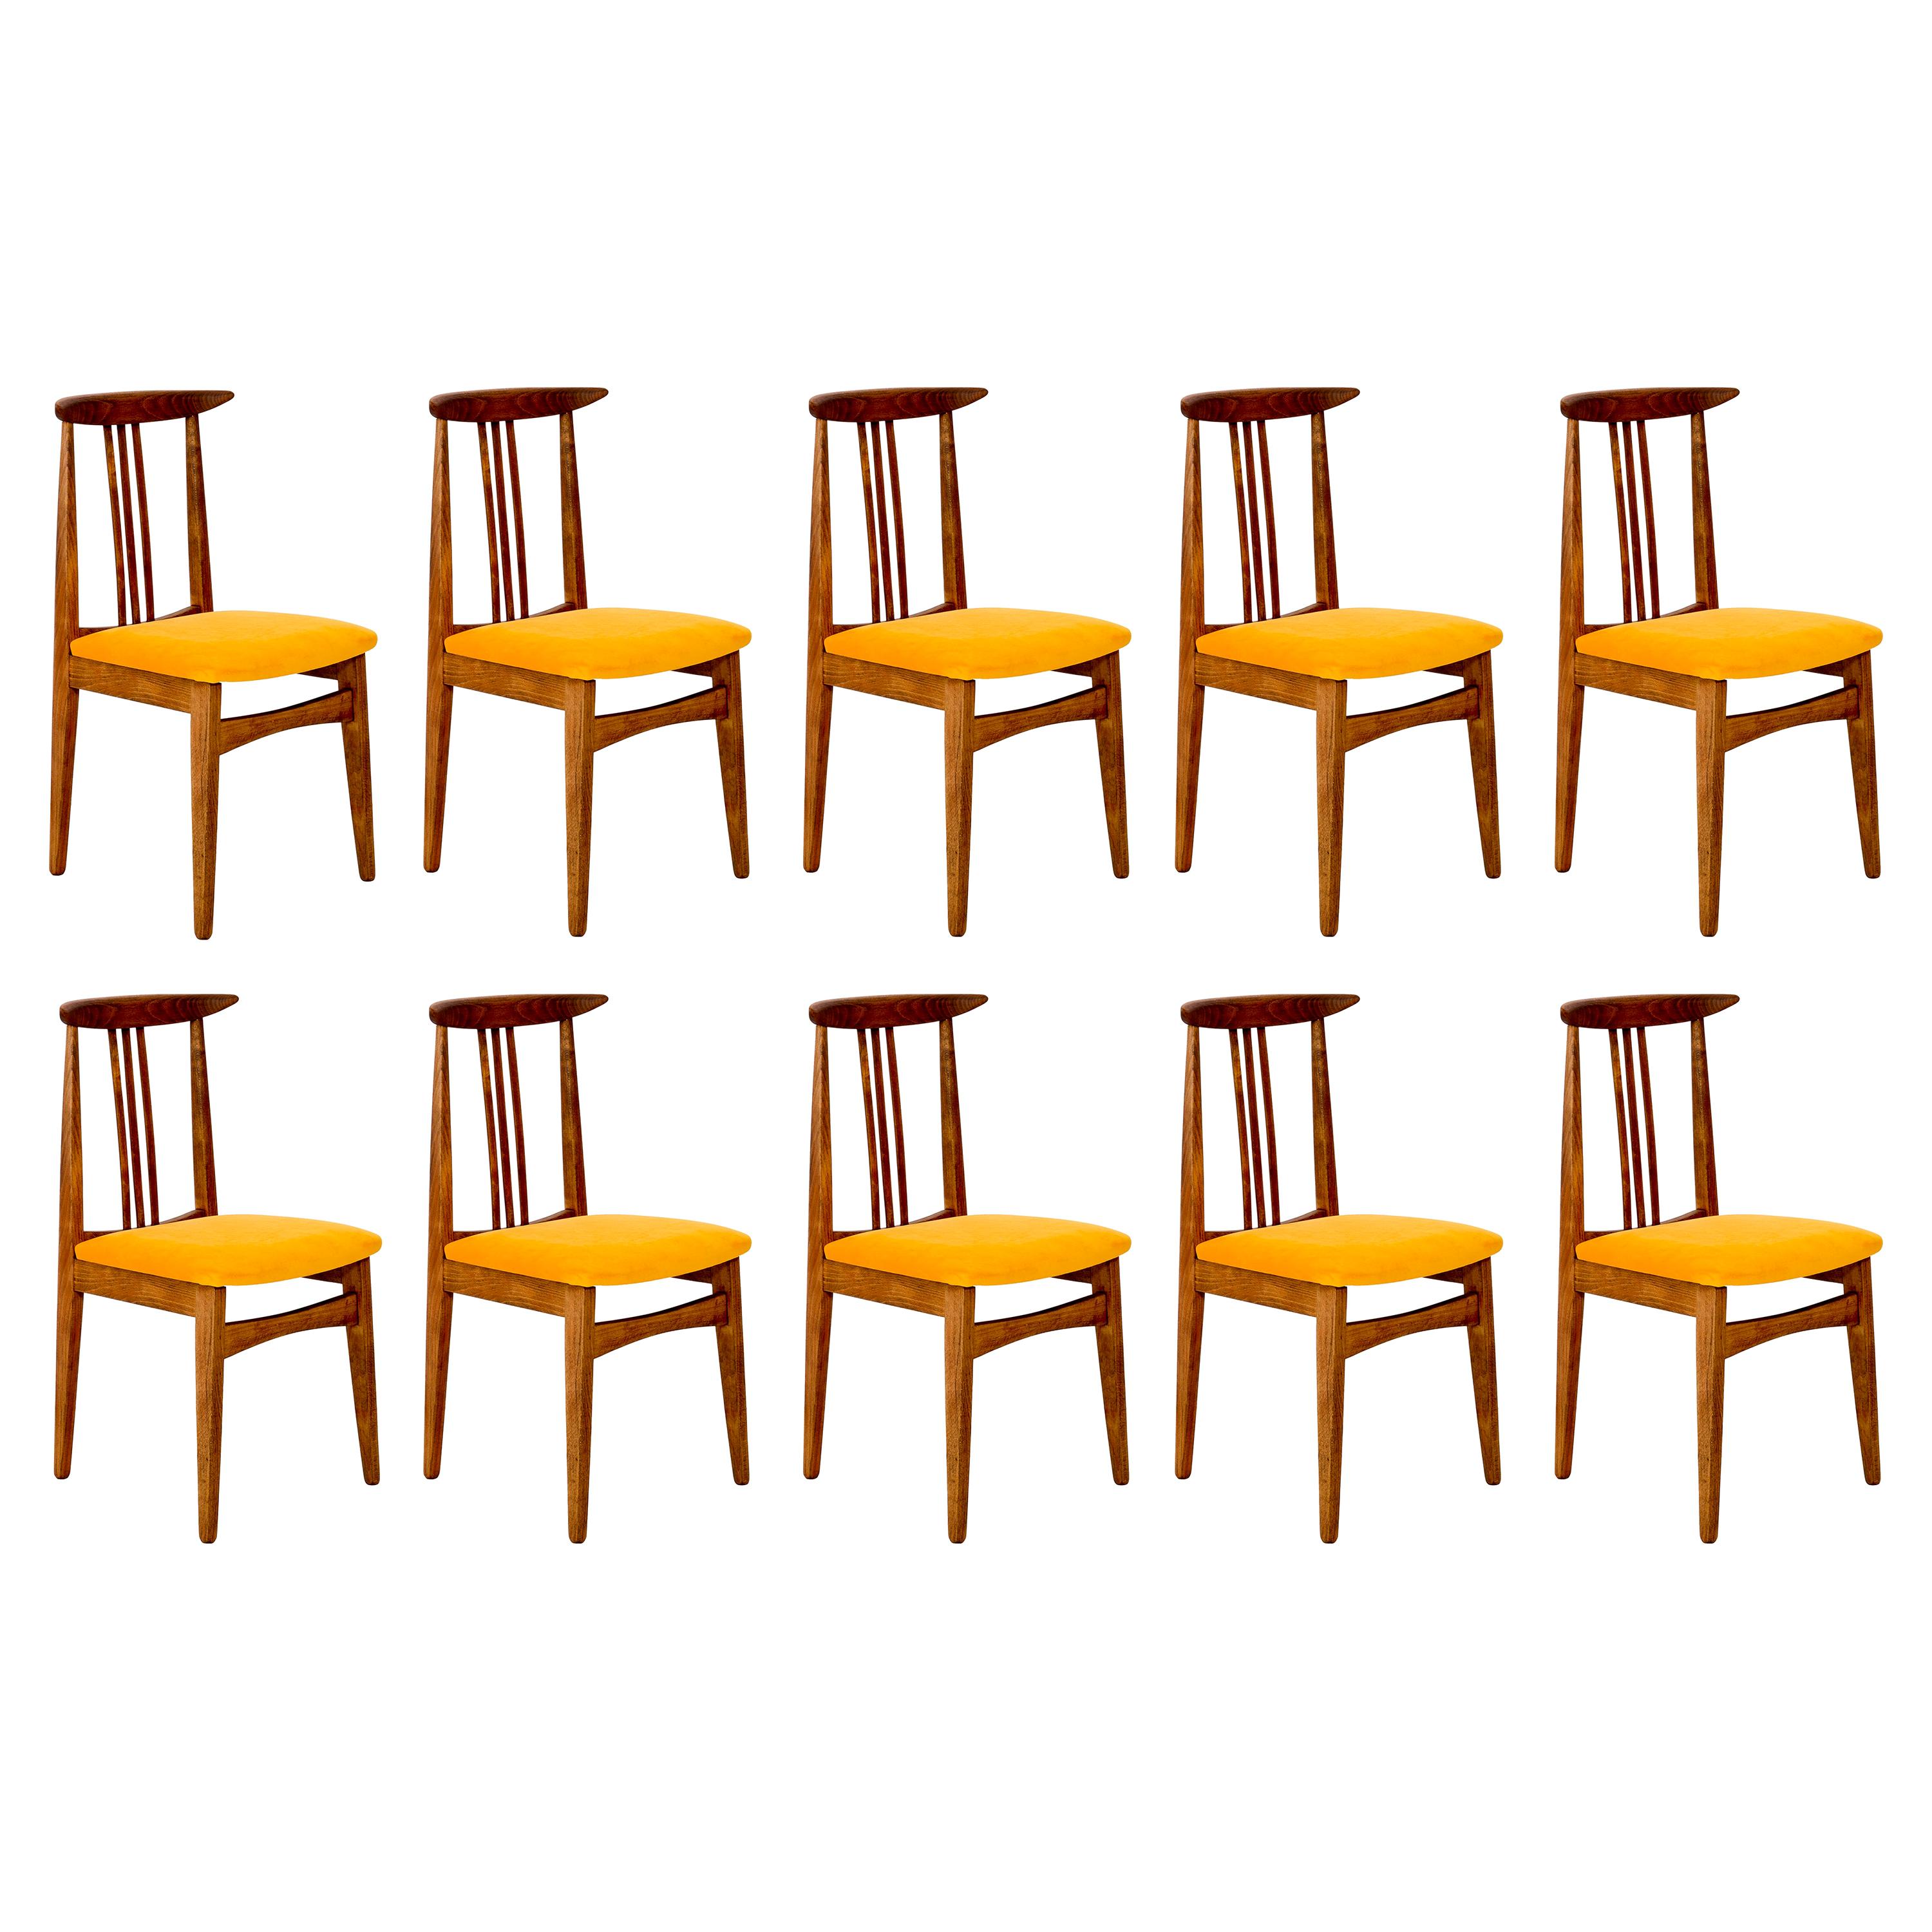 Set of Ten Yellow Chairs, by Zielinski, Europe, 1960s For Sale